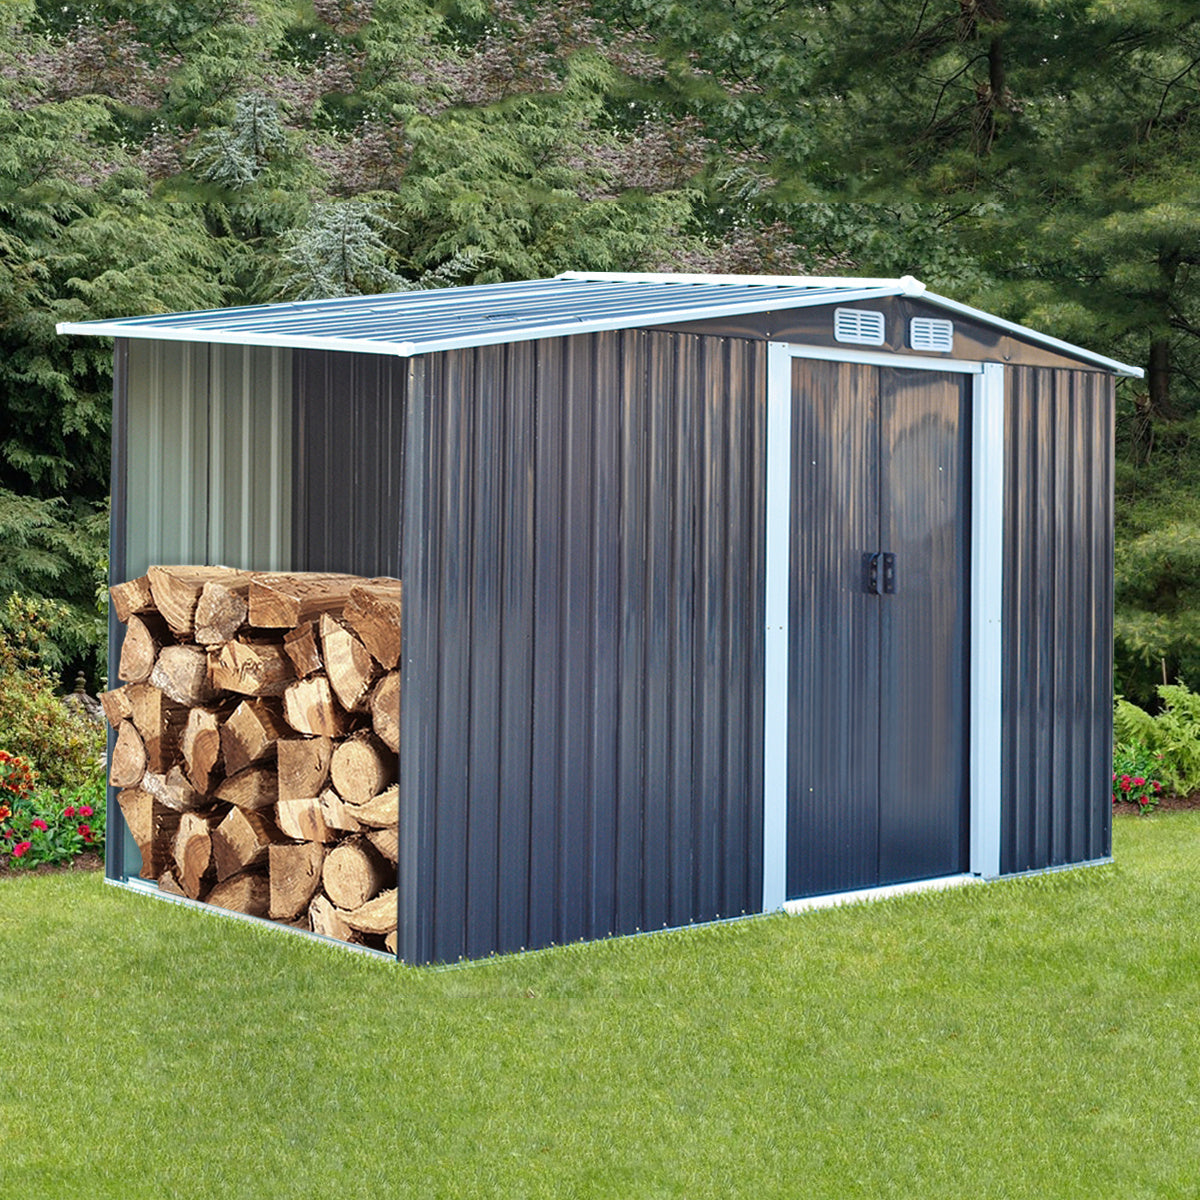 Garden Steel Shed Gable Roof Top with Firewood Storage Garden storage Garden Sanctuary W 329 x T 132 x H 178 cm 